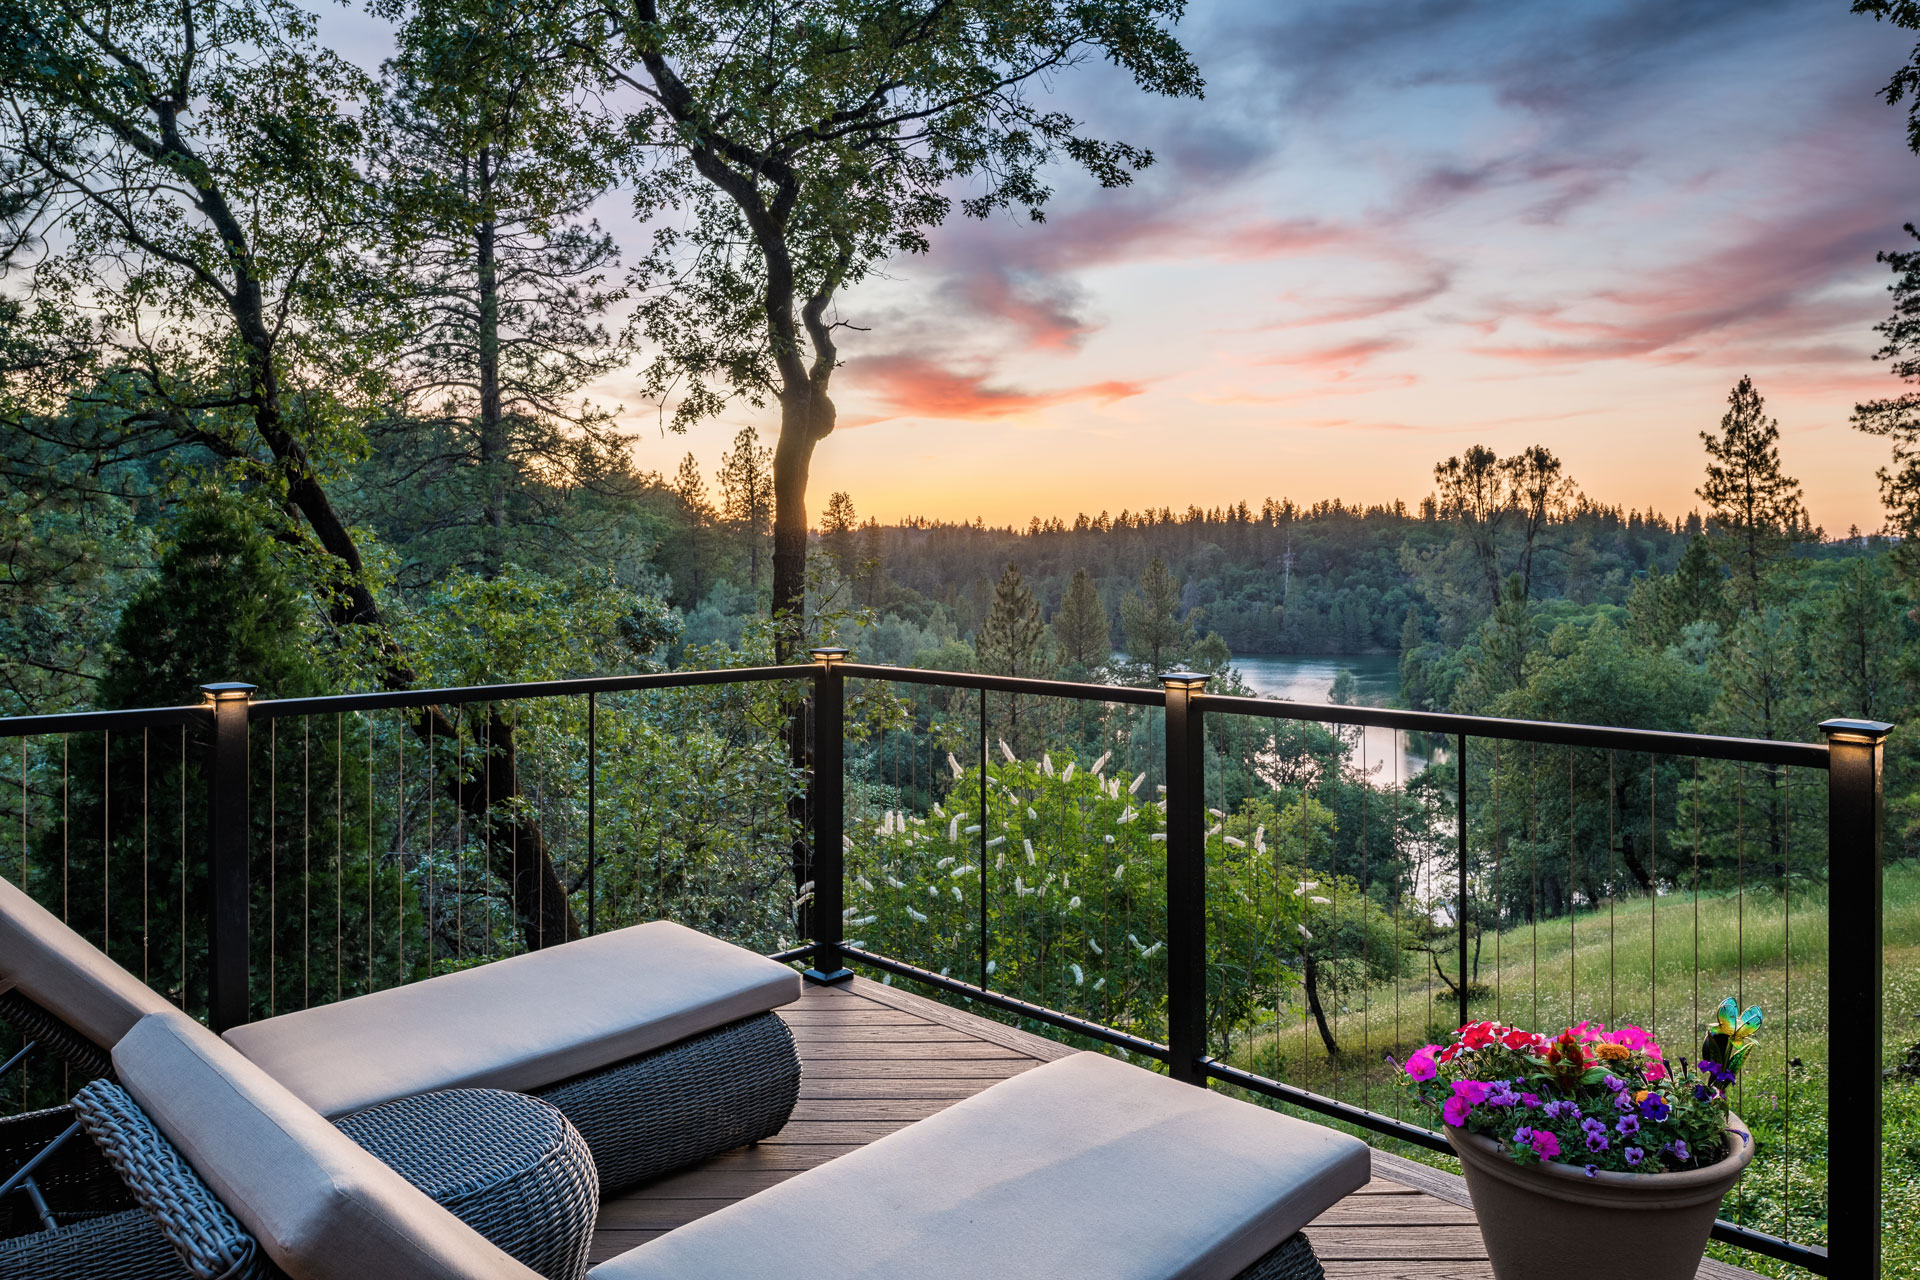 View from deck of the sunset over a lake with patio chairs and cable railing surrounding the deck.